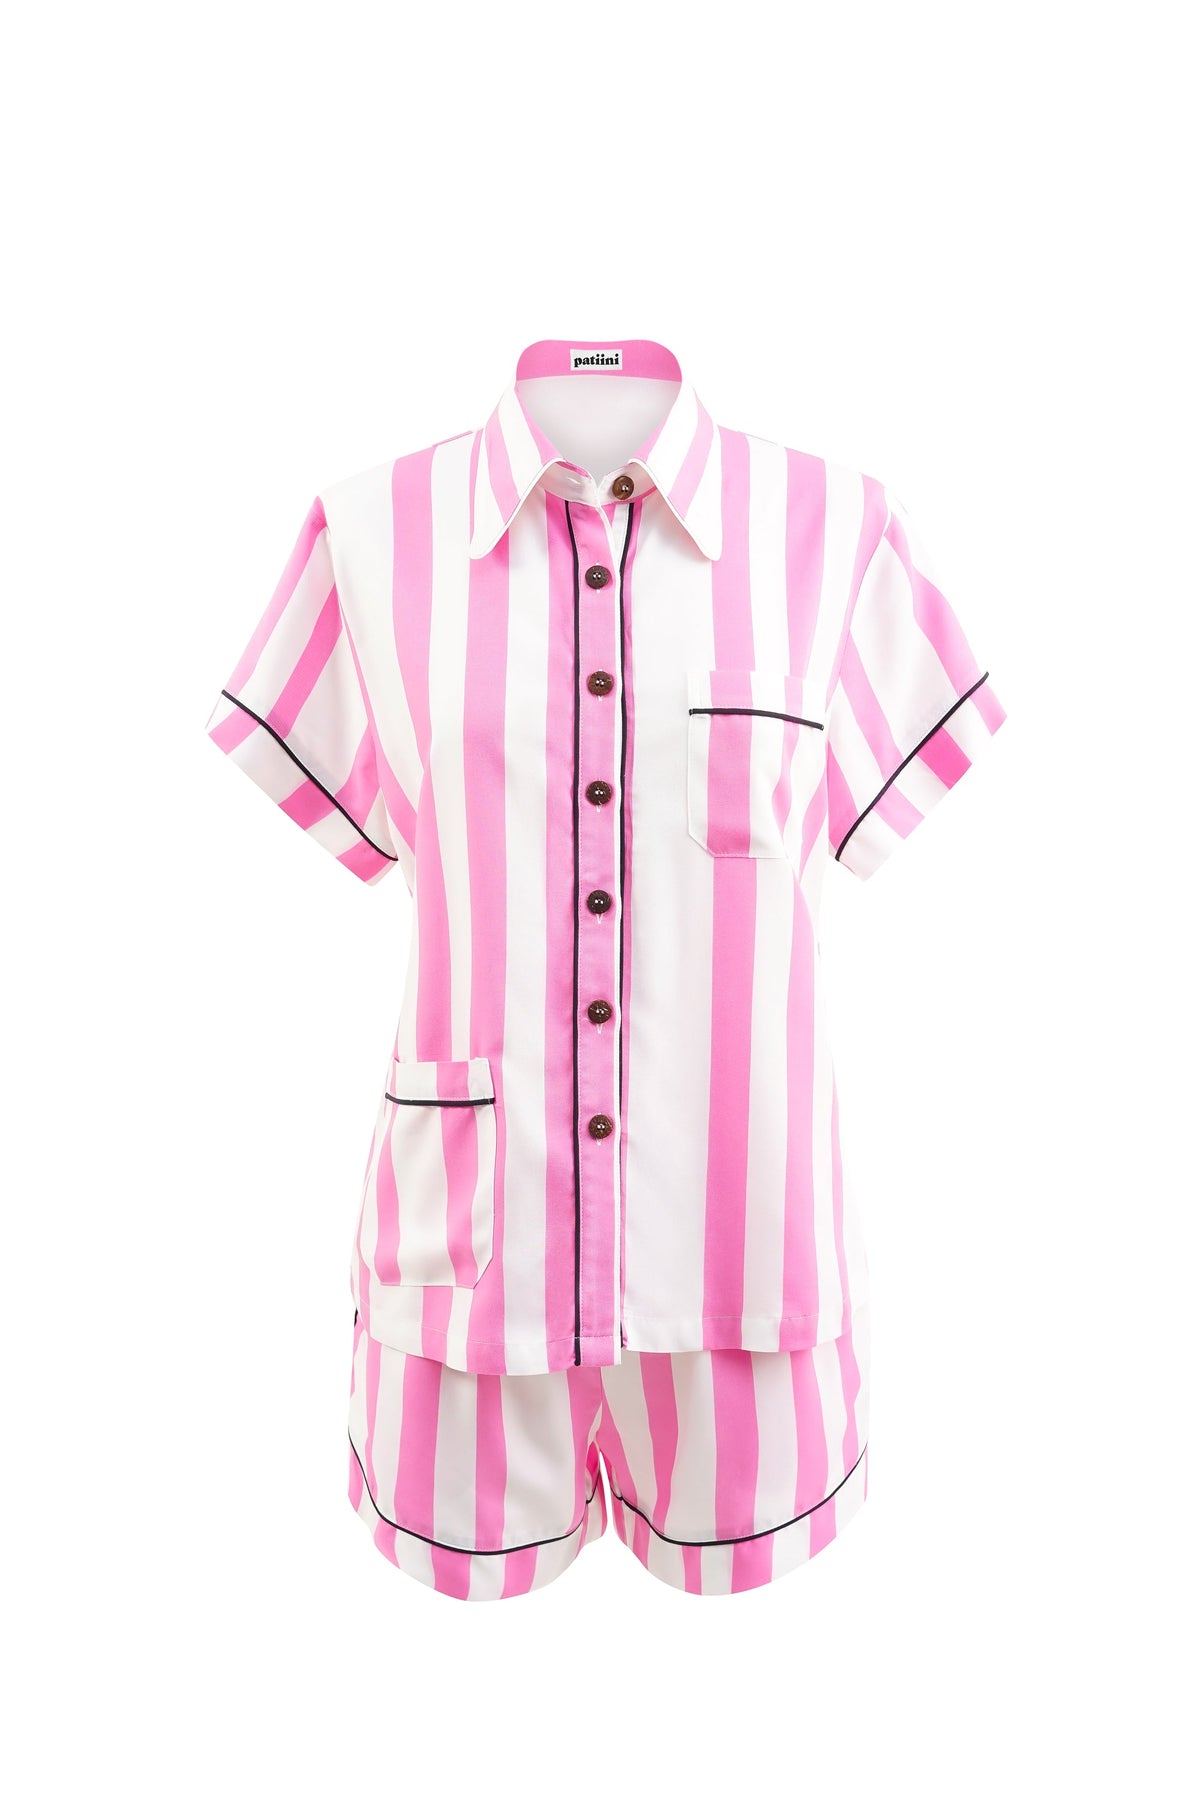 Pink and white striped short-sleeved pajama set with contrasting black piping.